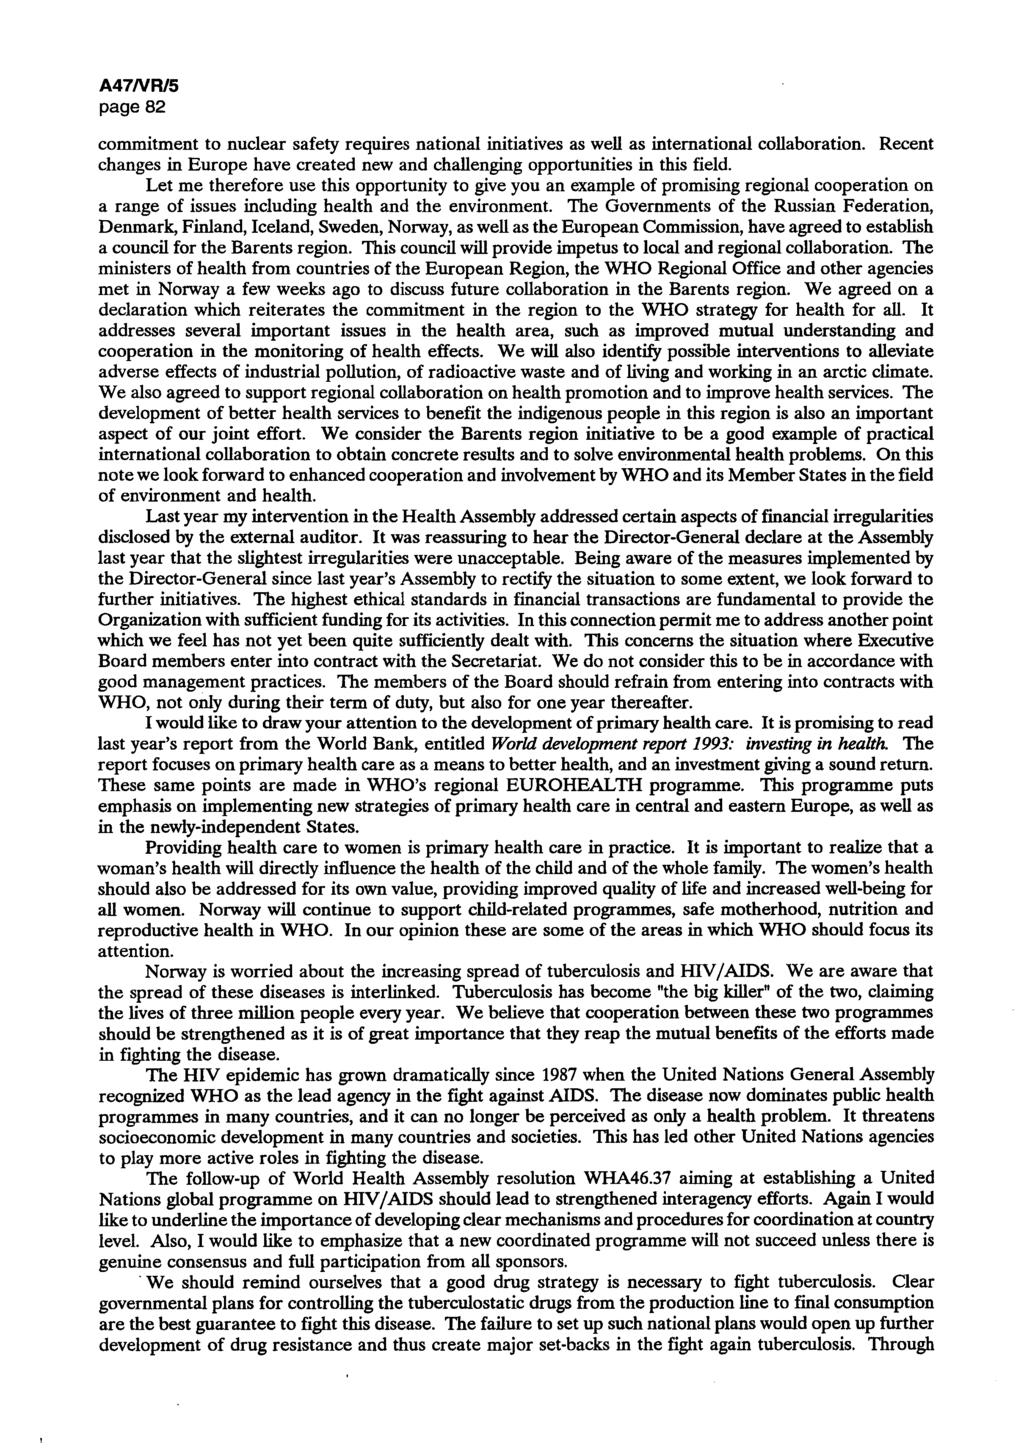 A47/VR/5 page 82 commitment to nuclear safety requires national initiatives as well as international collaboration.